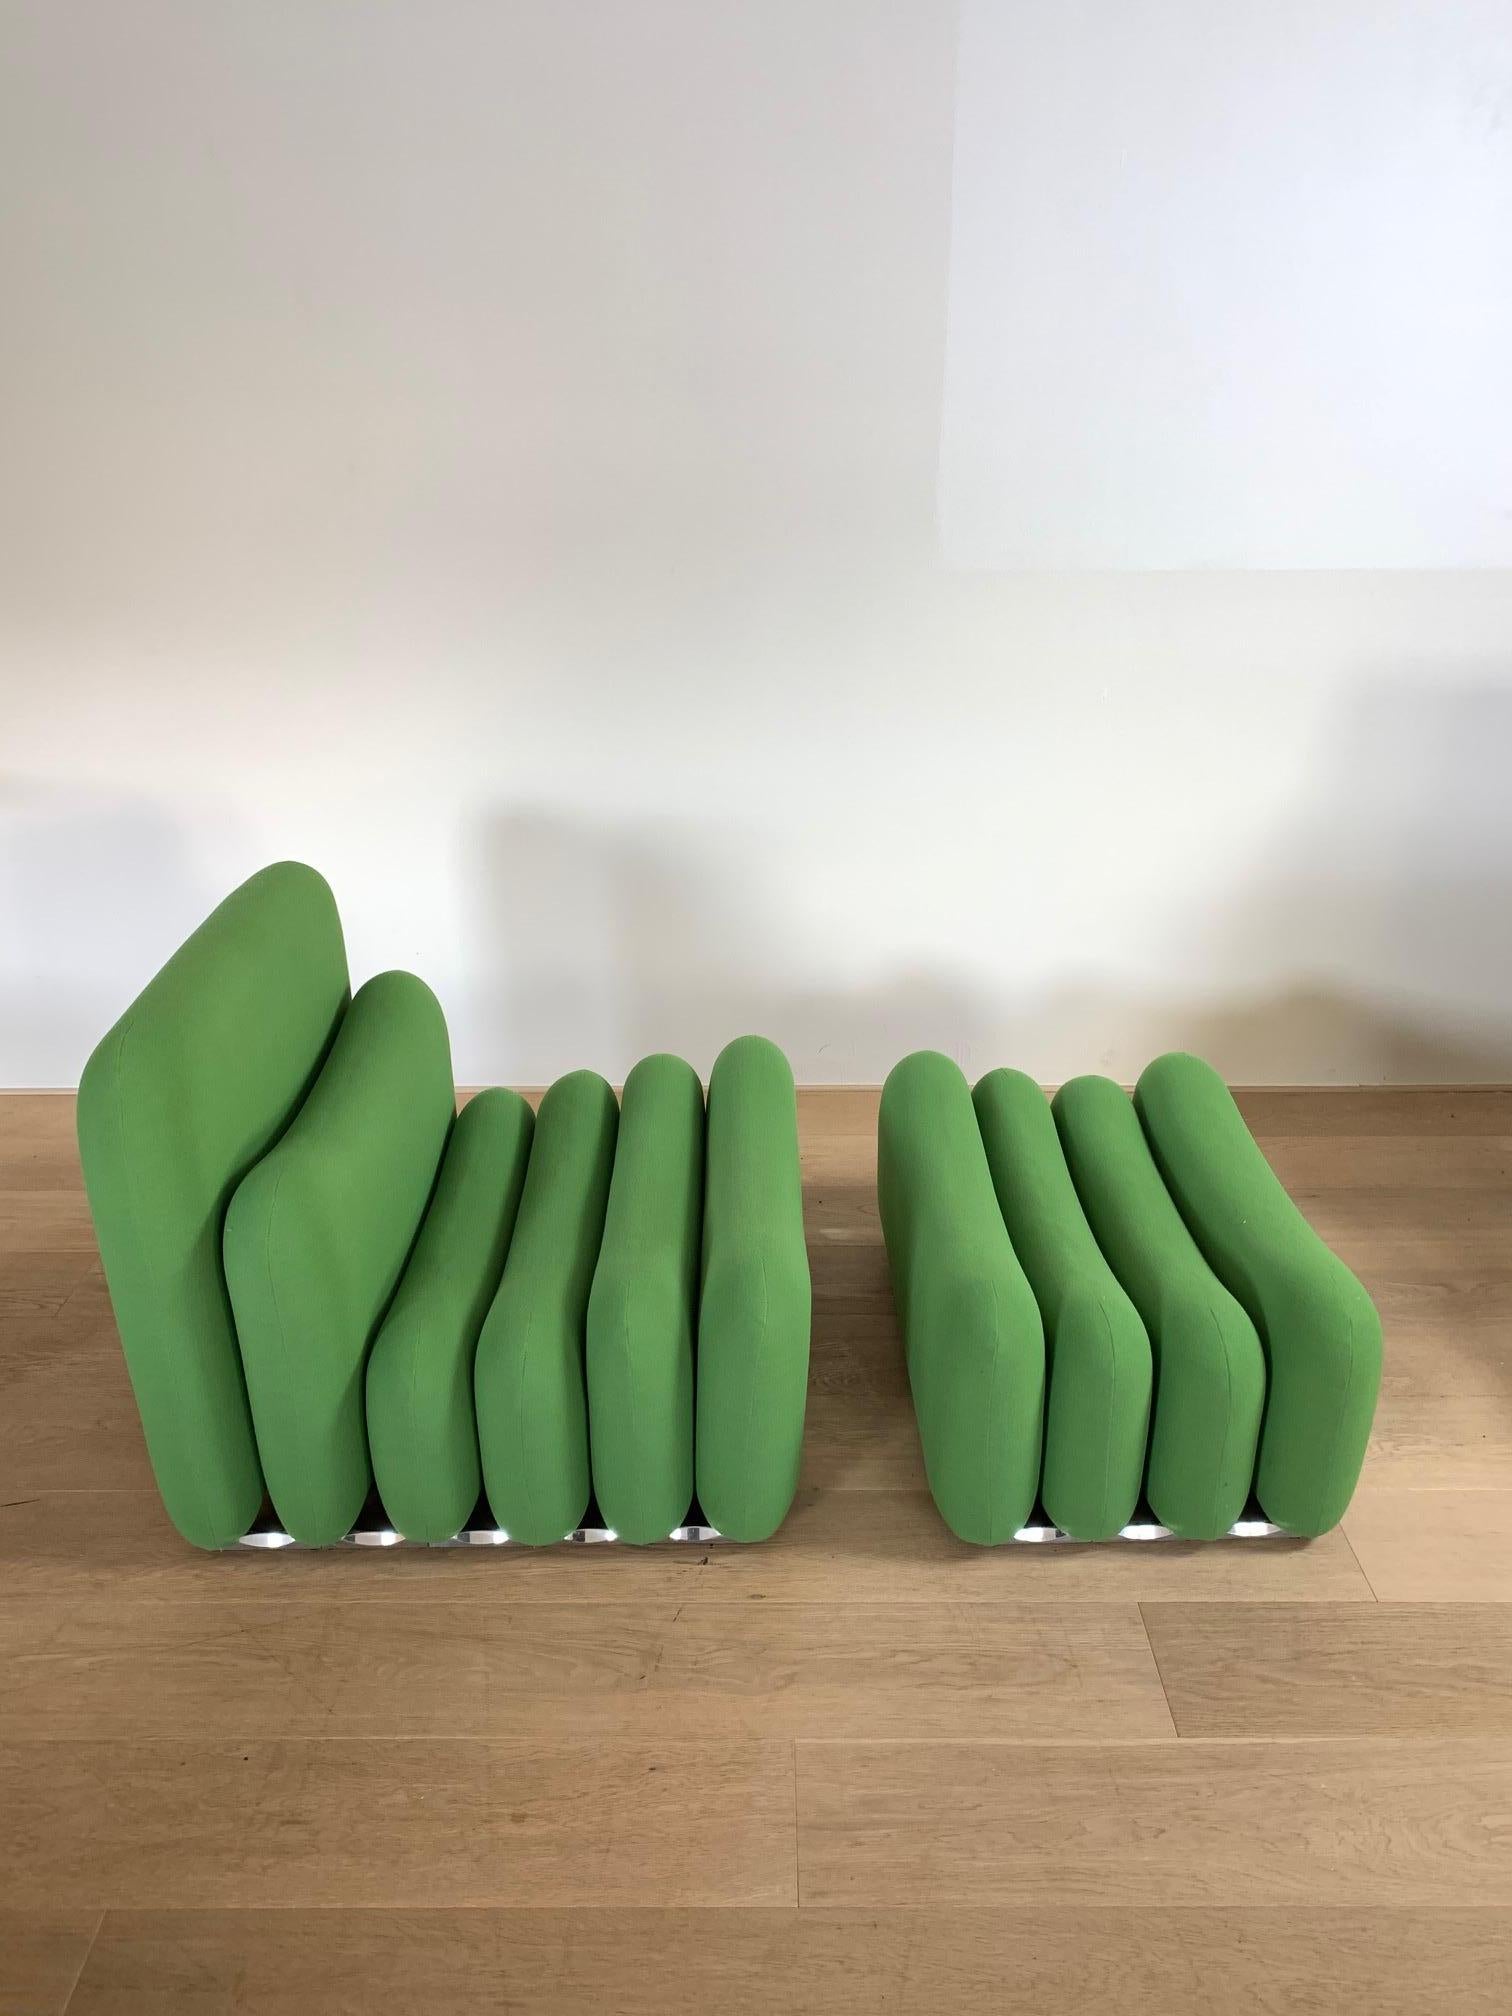 Joe Colombo's innovative Additional-System lounge chair with ottoman utilizes various sized cushions connected by aluminum pins impressed with Sormani Logo. Green jersey wool lining.
Literature: Joe Colombo and Italian Design of the 1960s, Favata,